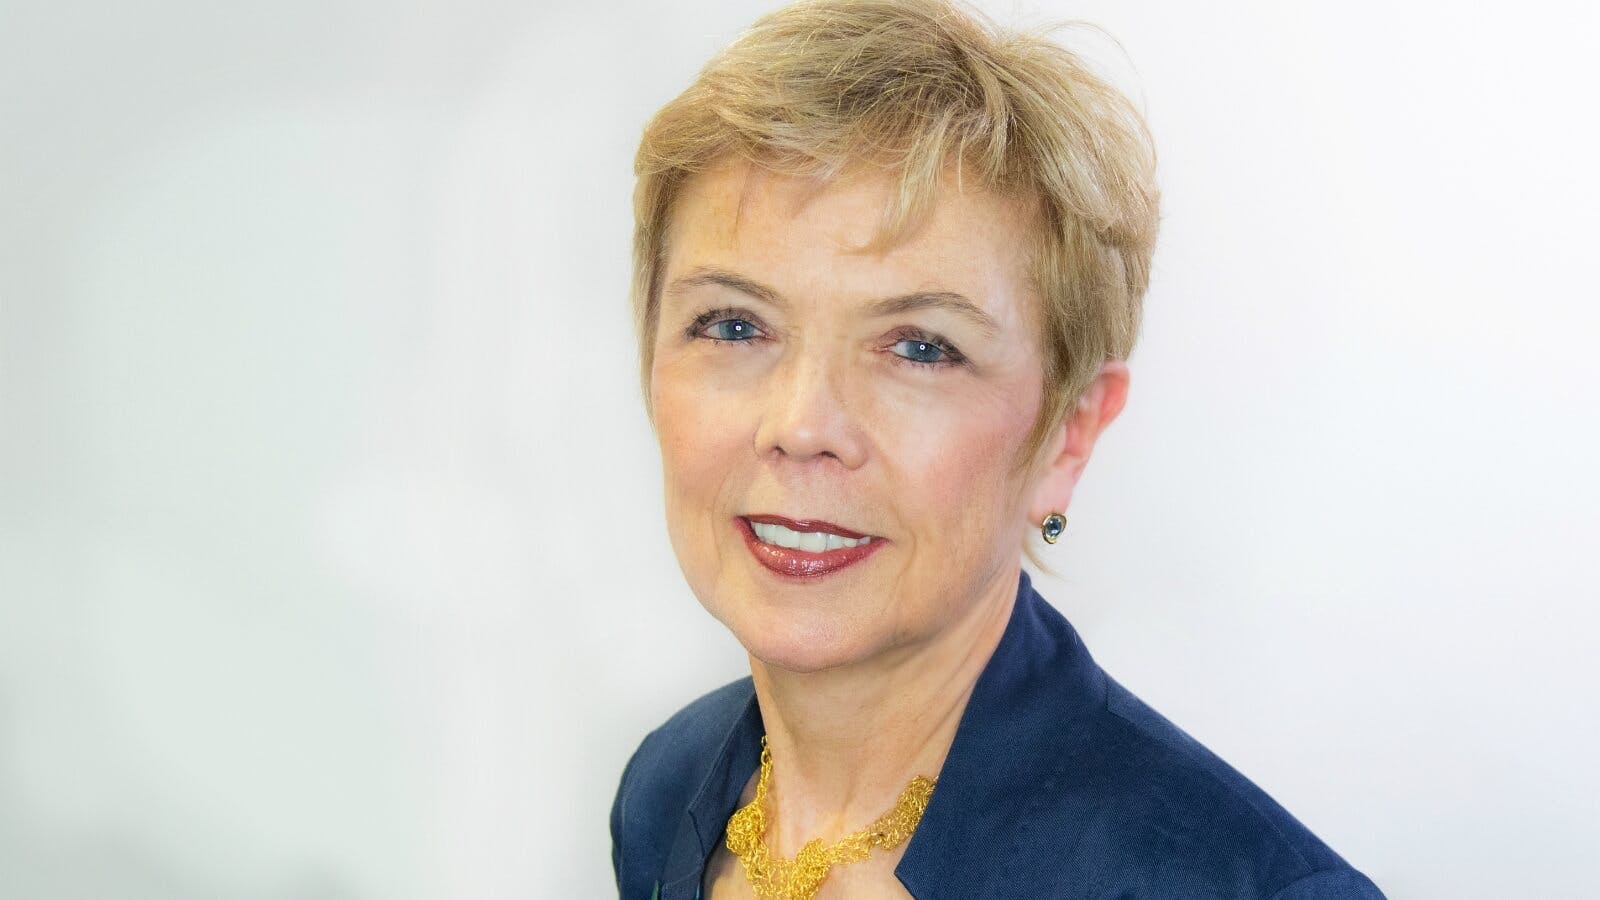 Dame Sue Owen, The former Permanent Secretary at the Department for Digital, Culture, Media and Sport 